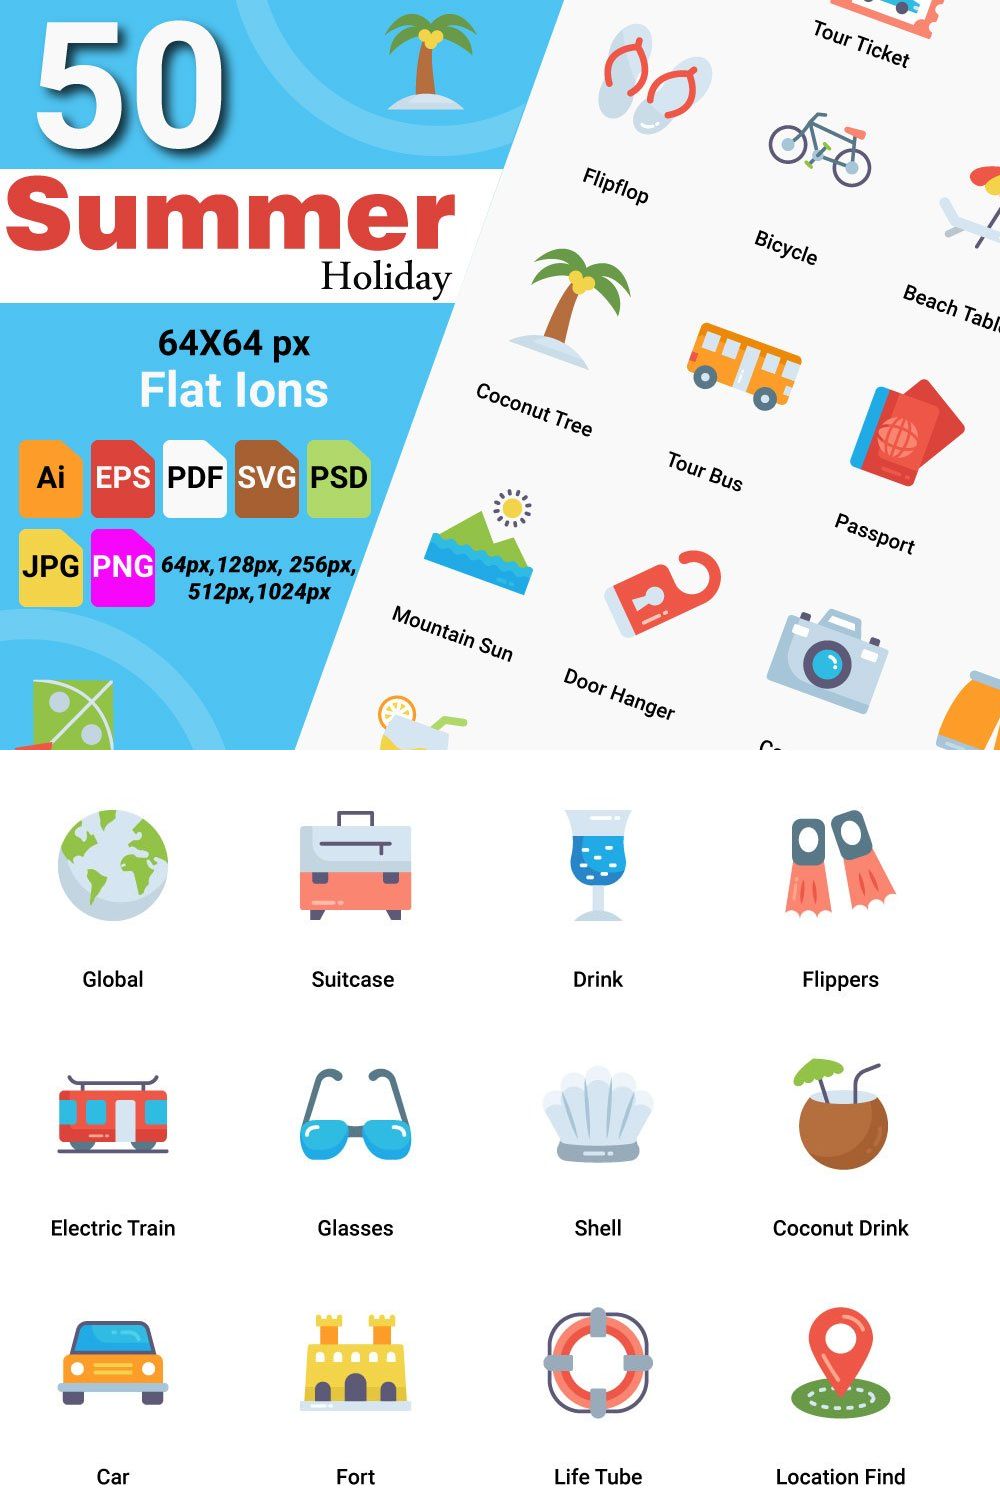 Summer Holiday pinterest preview image.